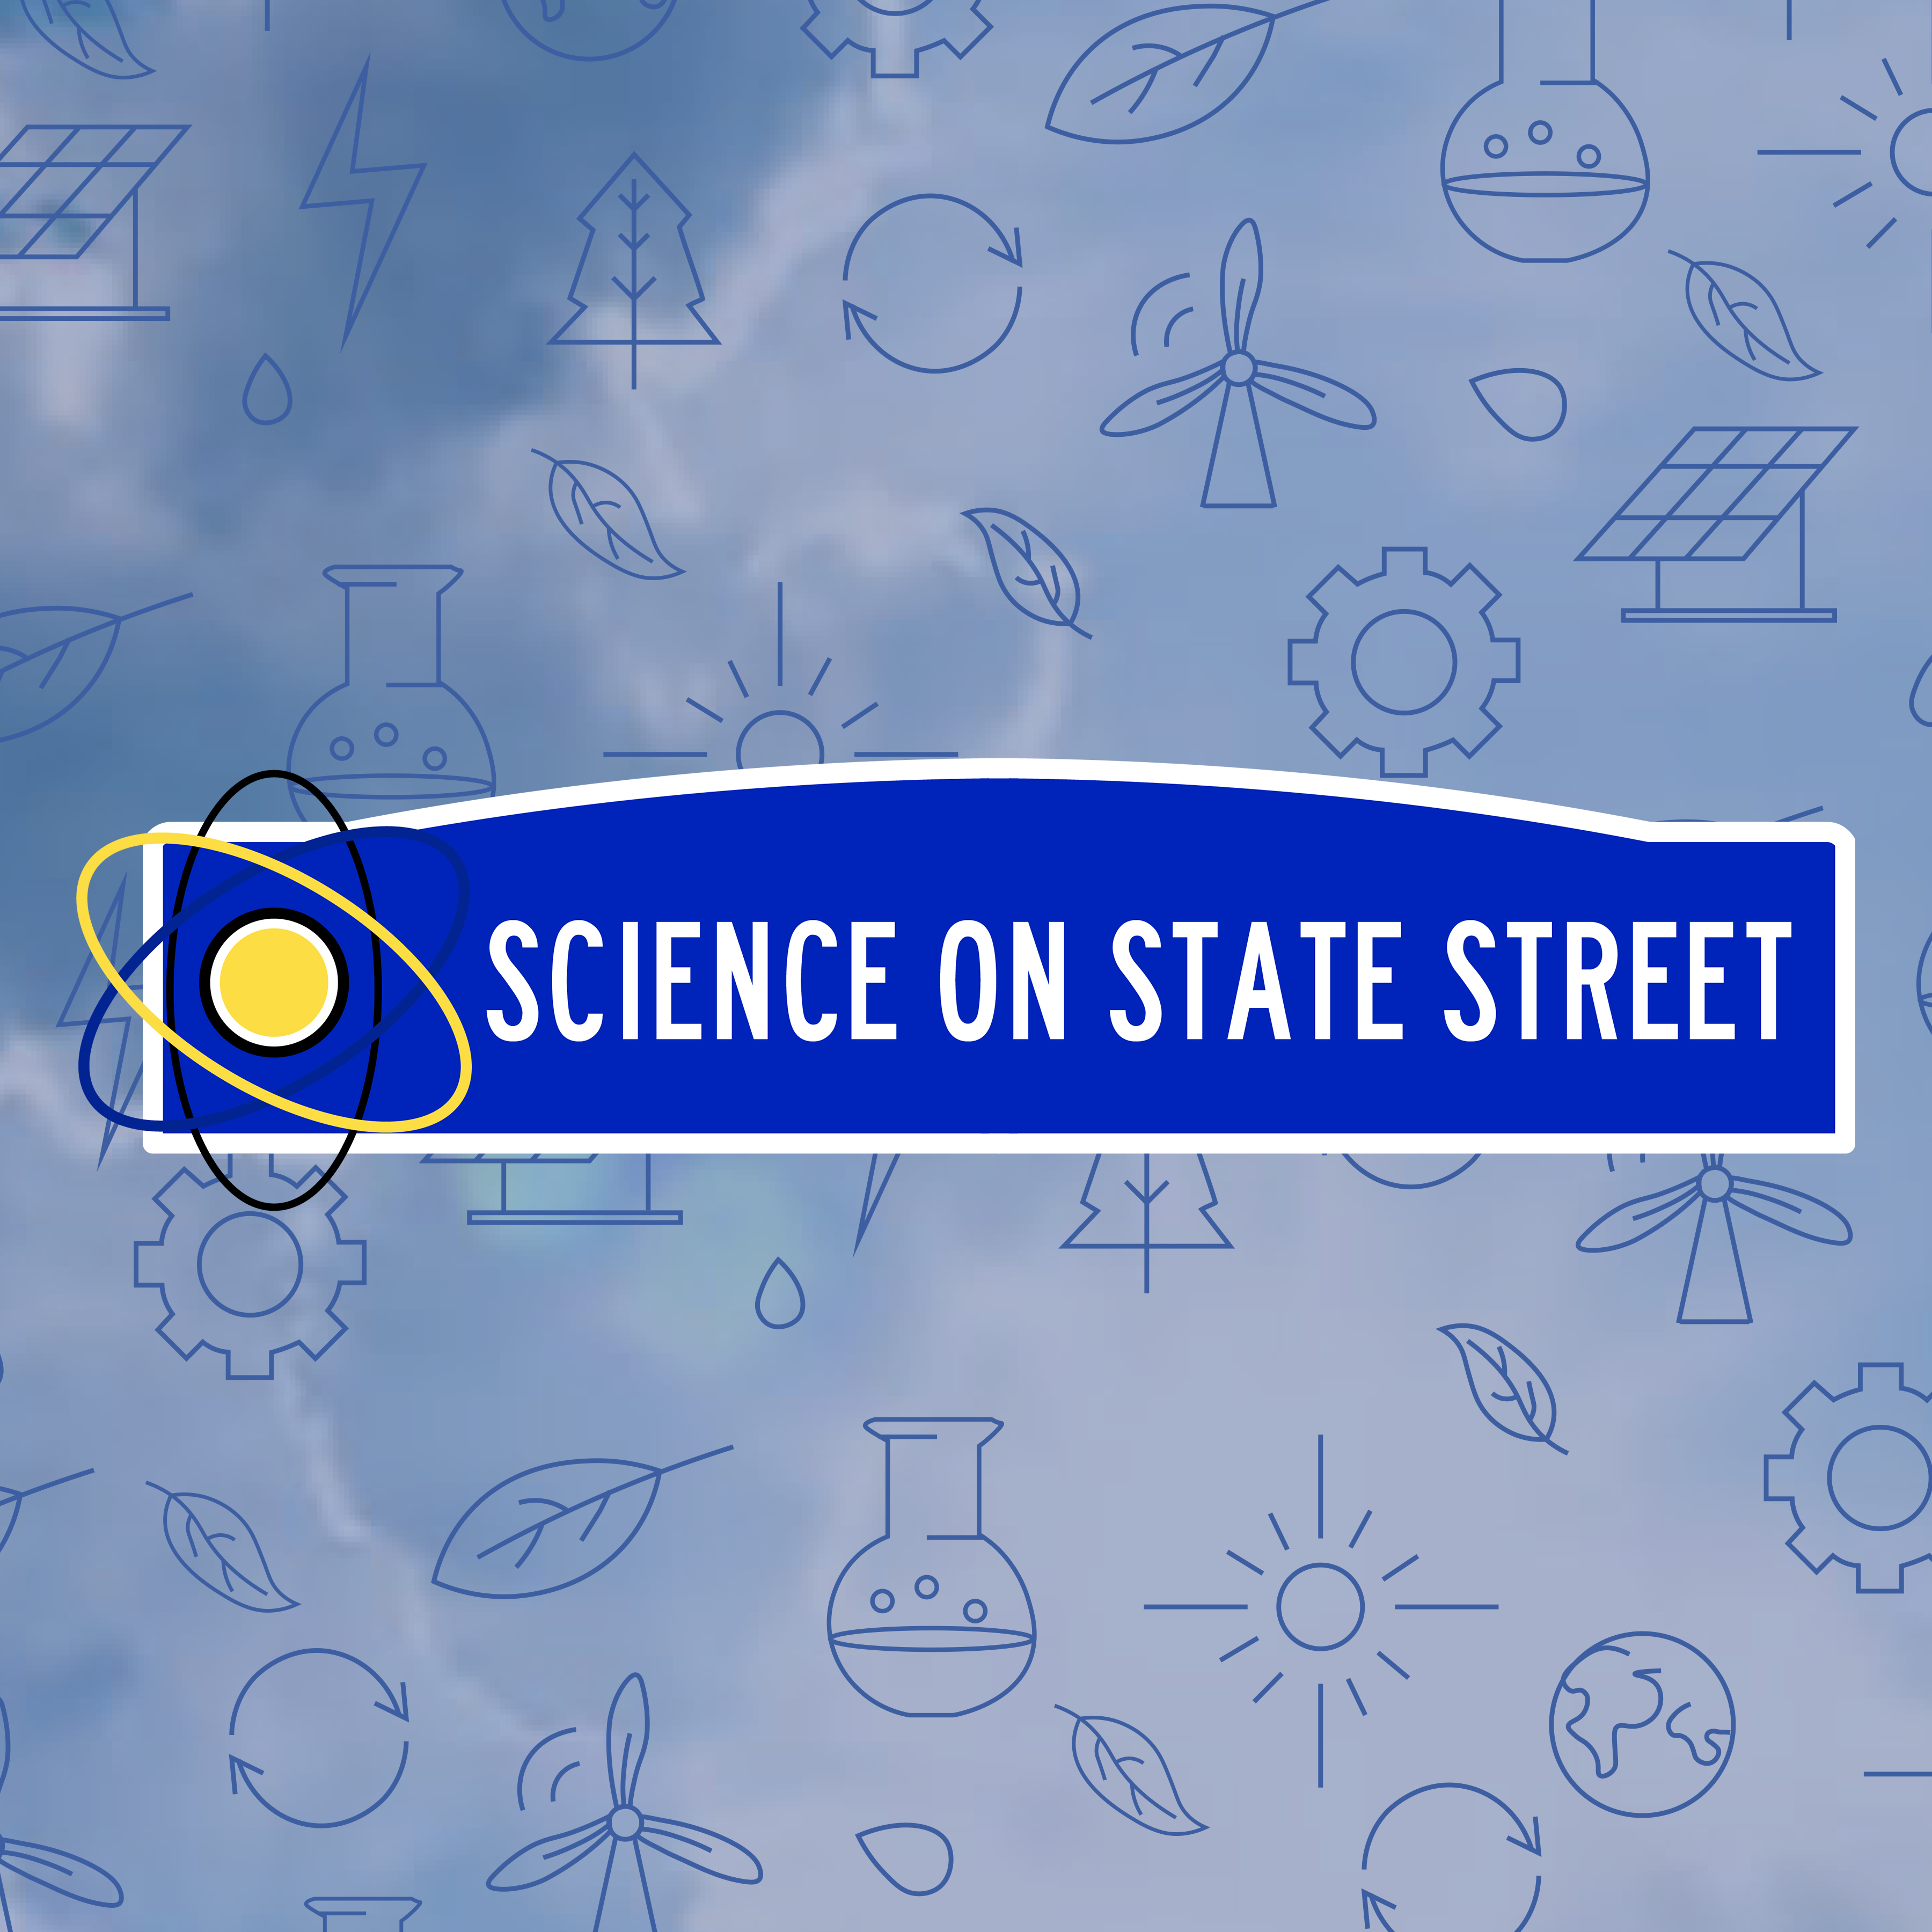 Science on State Street: Saturday, April 27th from 12-3PM